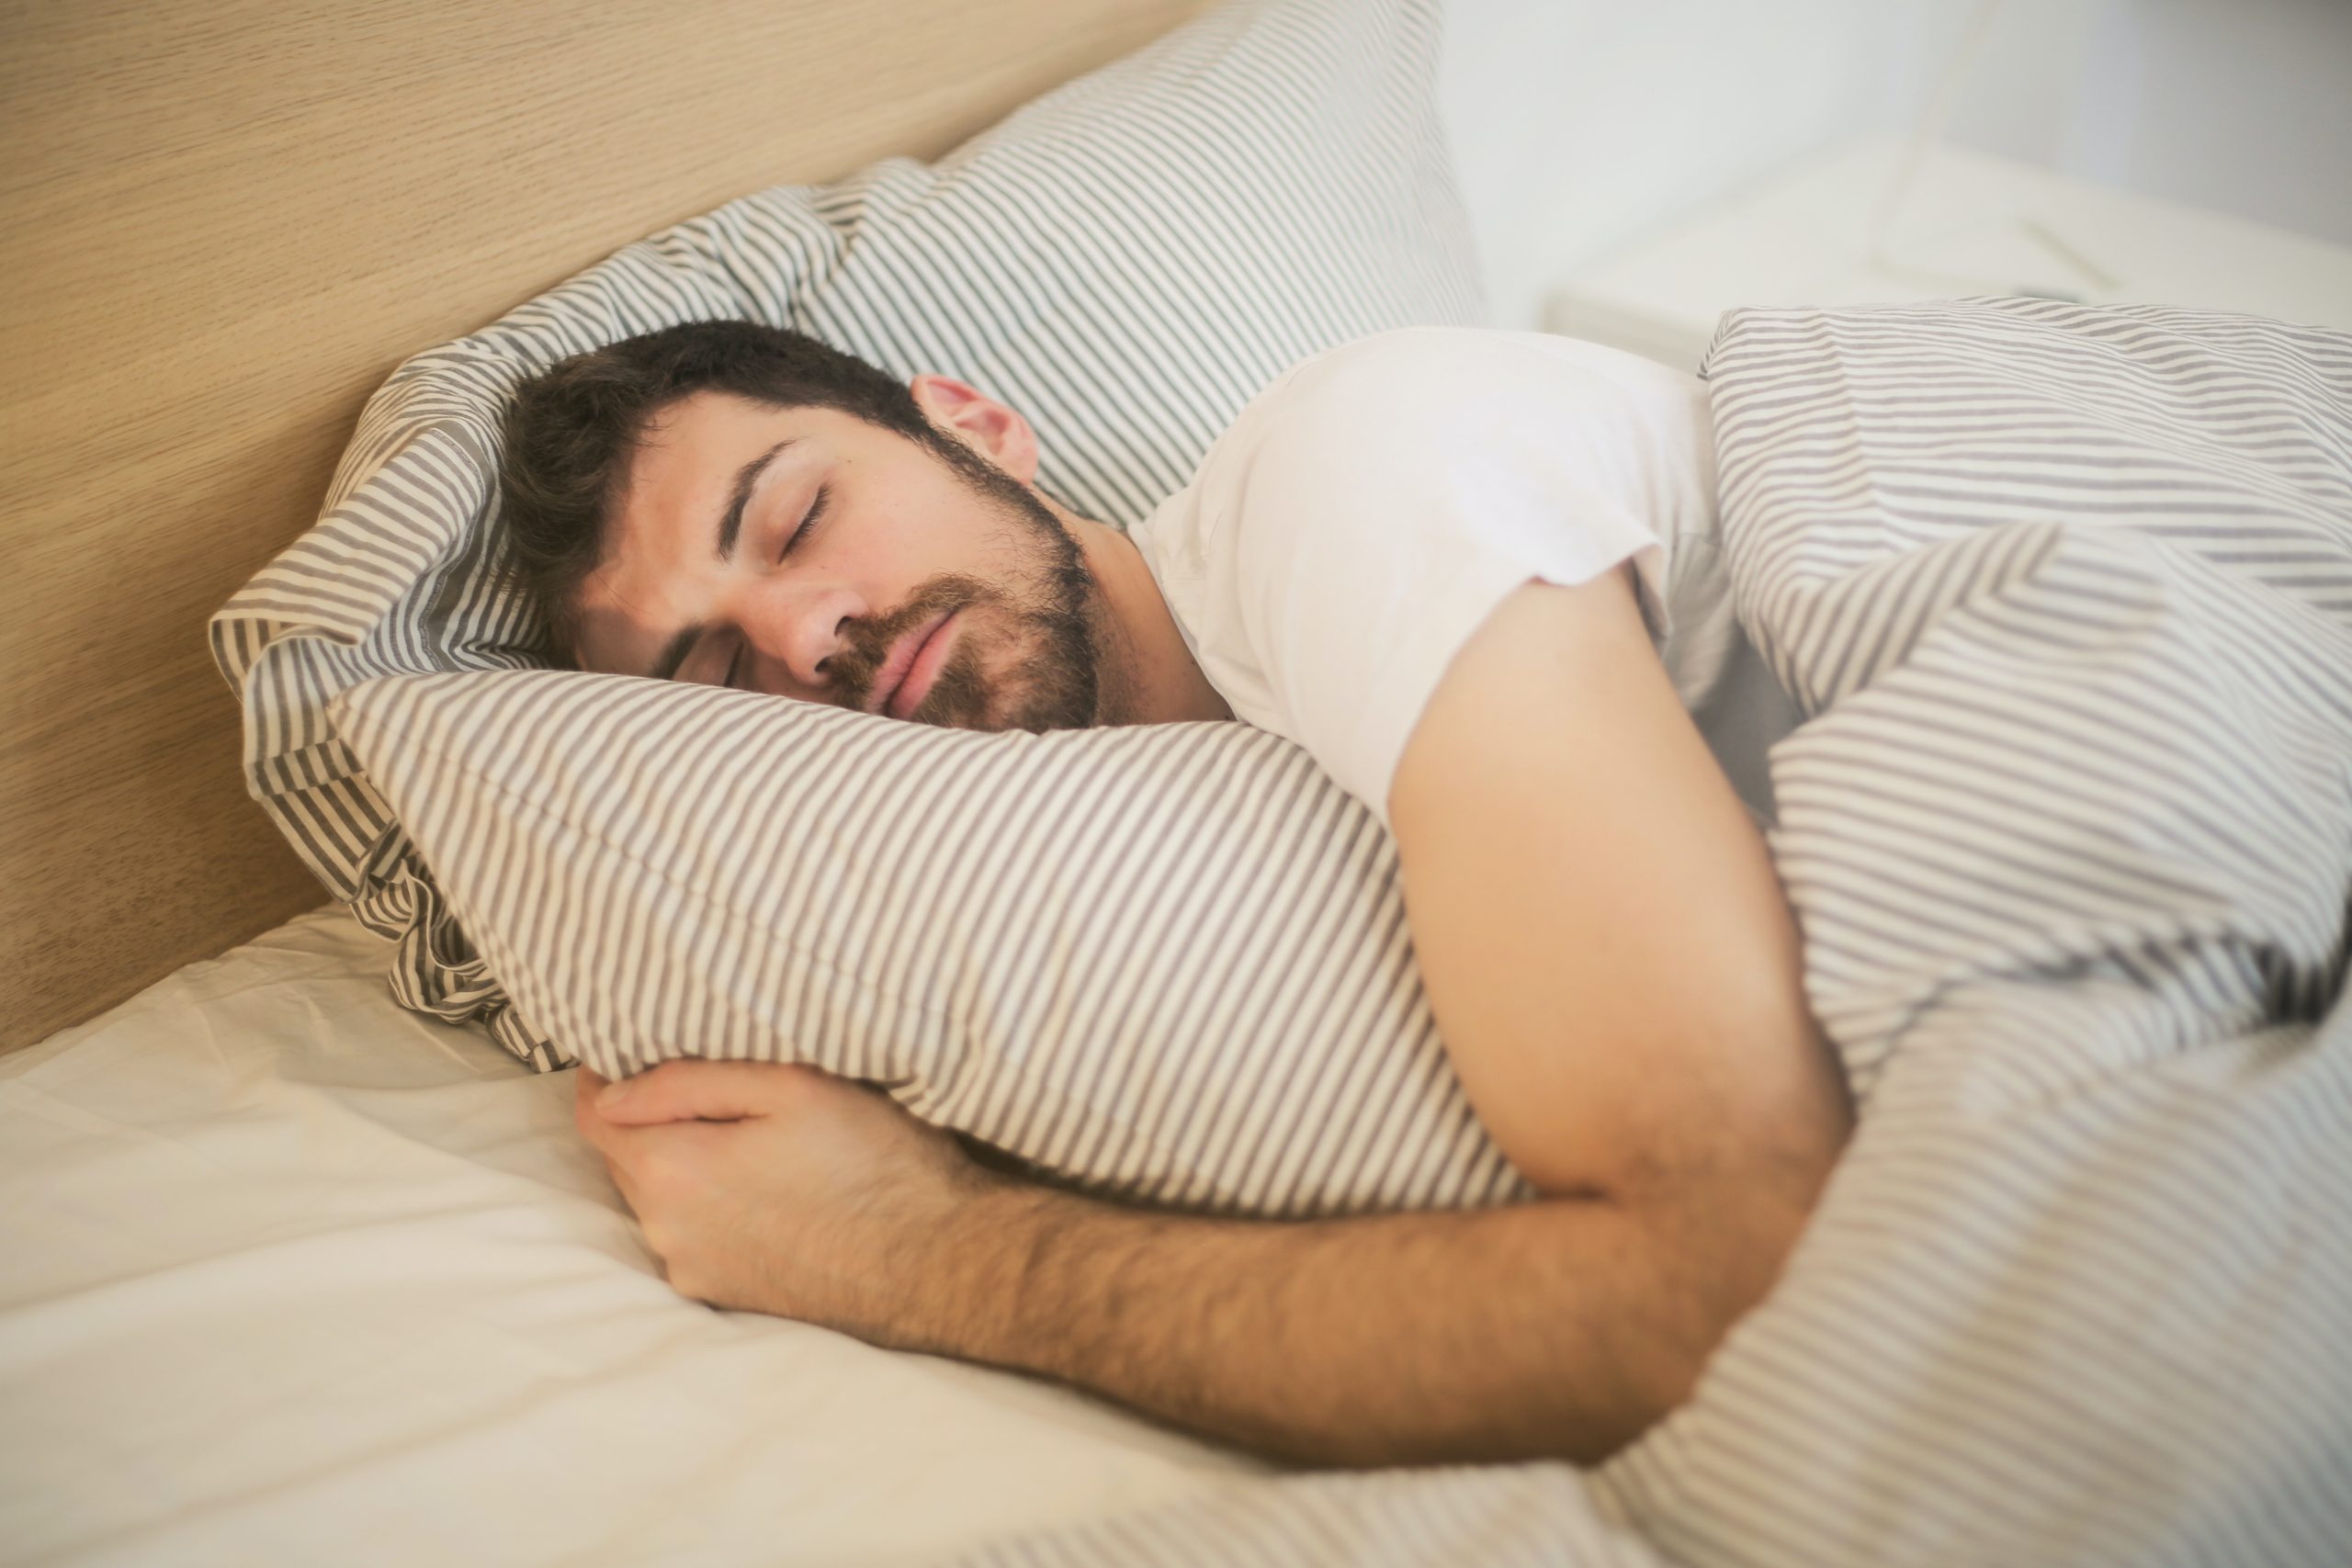 Man sleeping in bed with arm wrapped around pillow